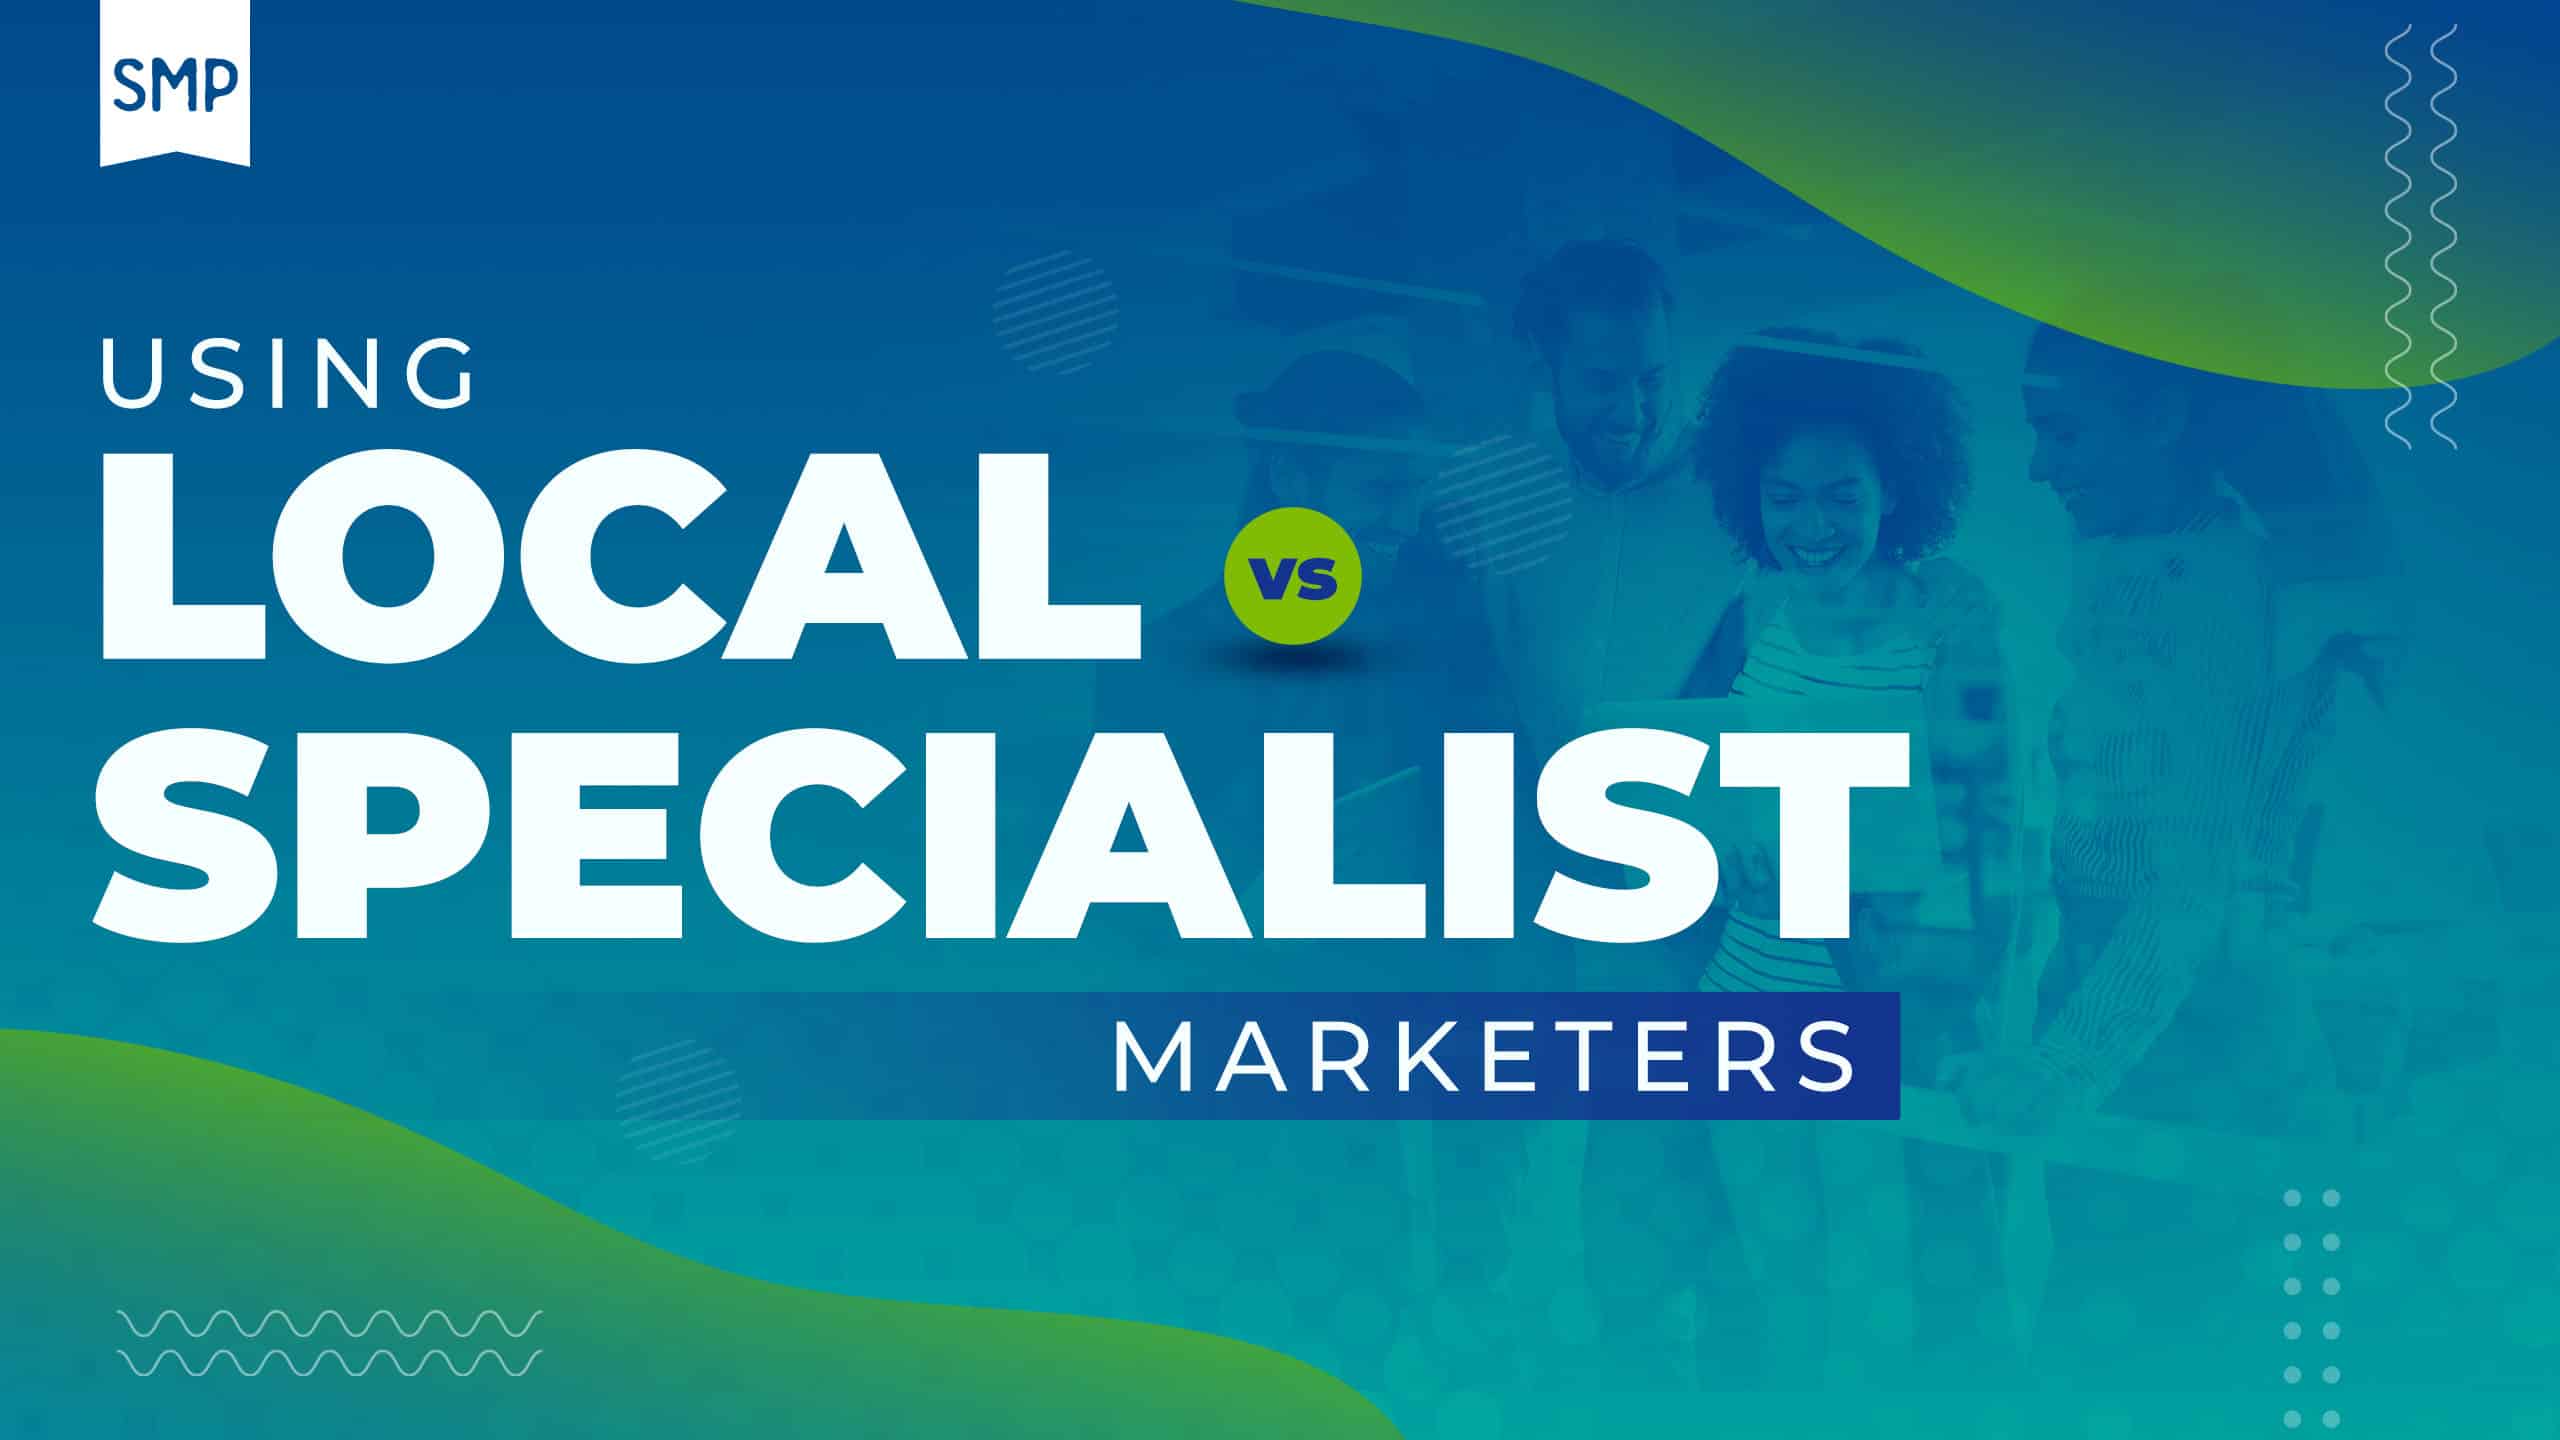 SEO Marketing, Blog, Using Local vs Specialist Marketers. Image features a group of diverse people collaborating, with bold text highlighting the comparison between local and specialist marketers. The background has a gradient blue and green design.